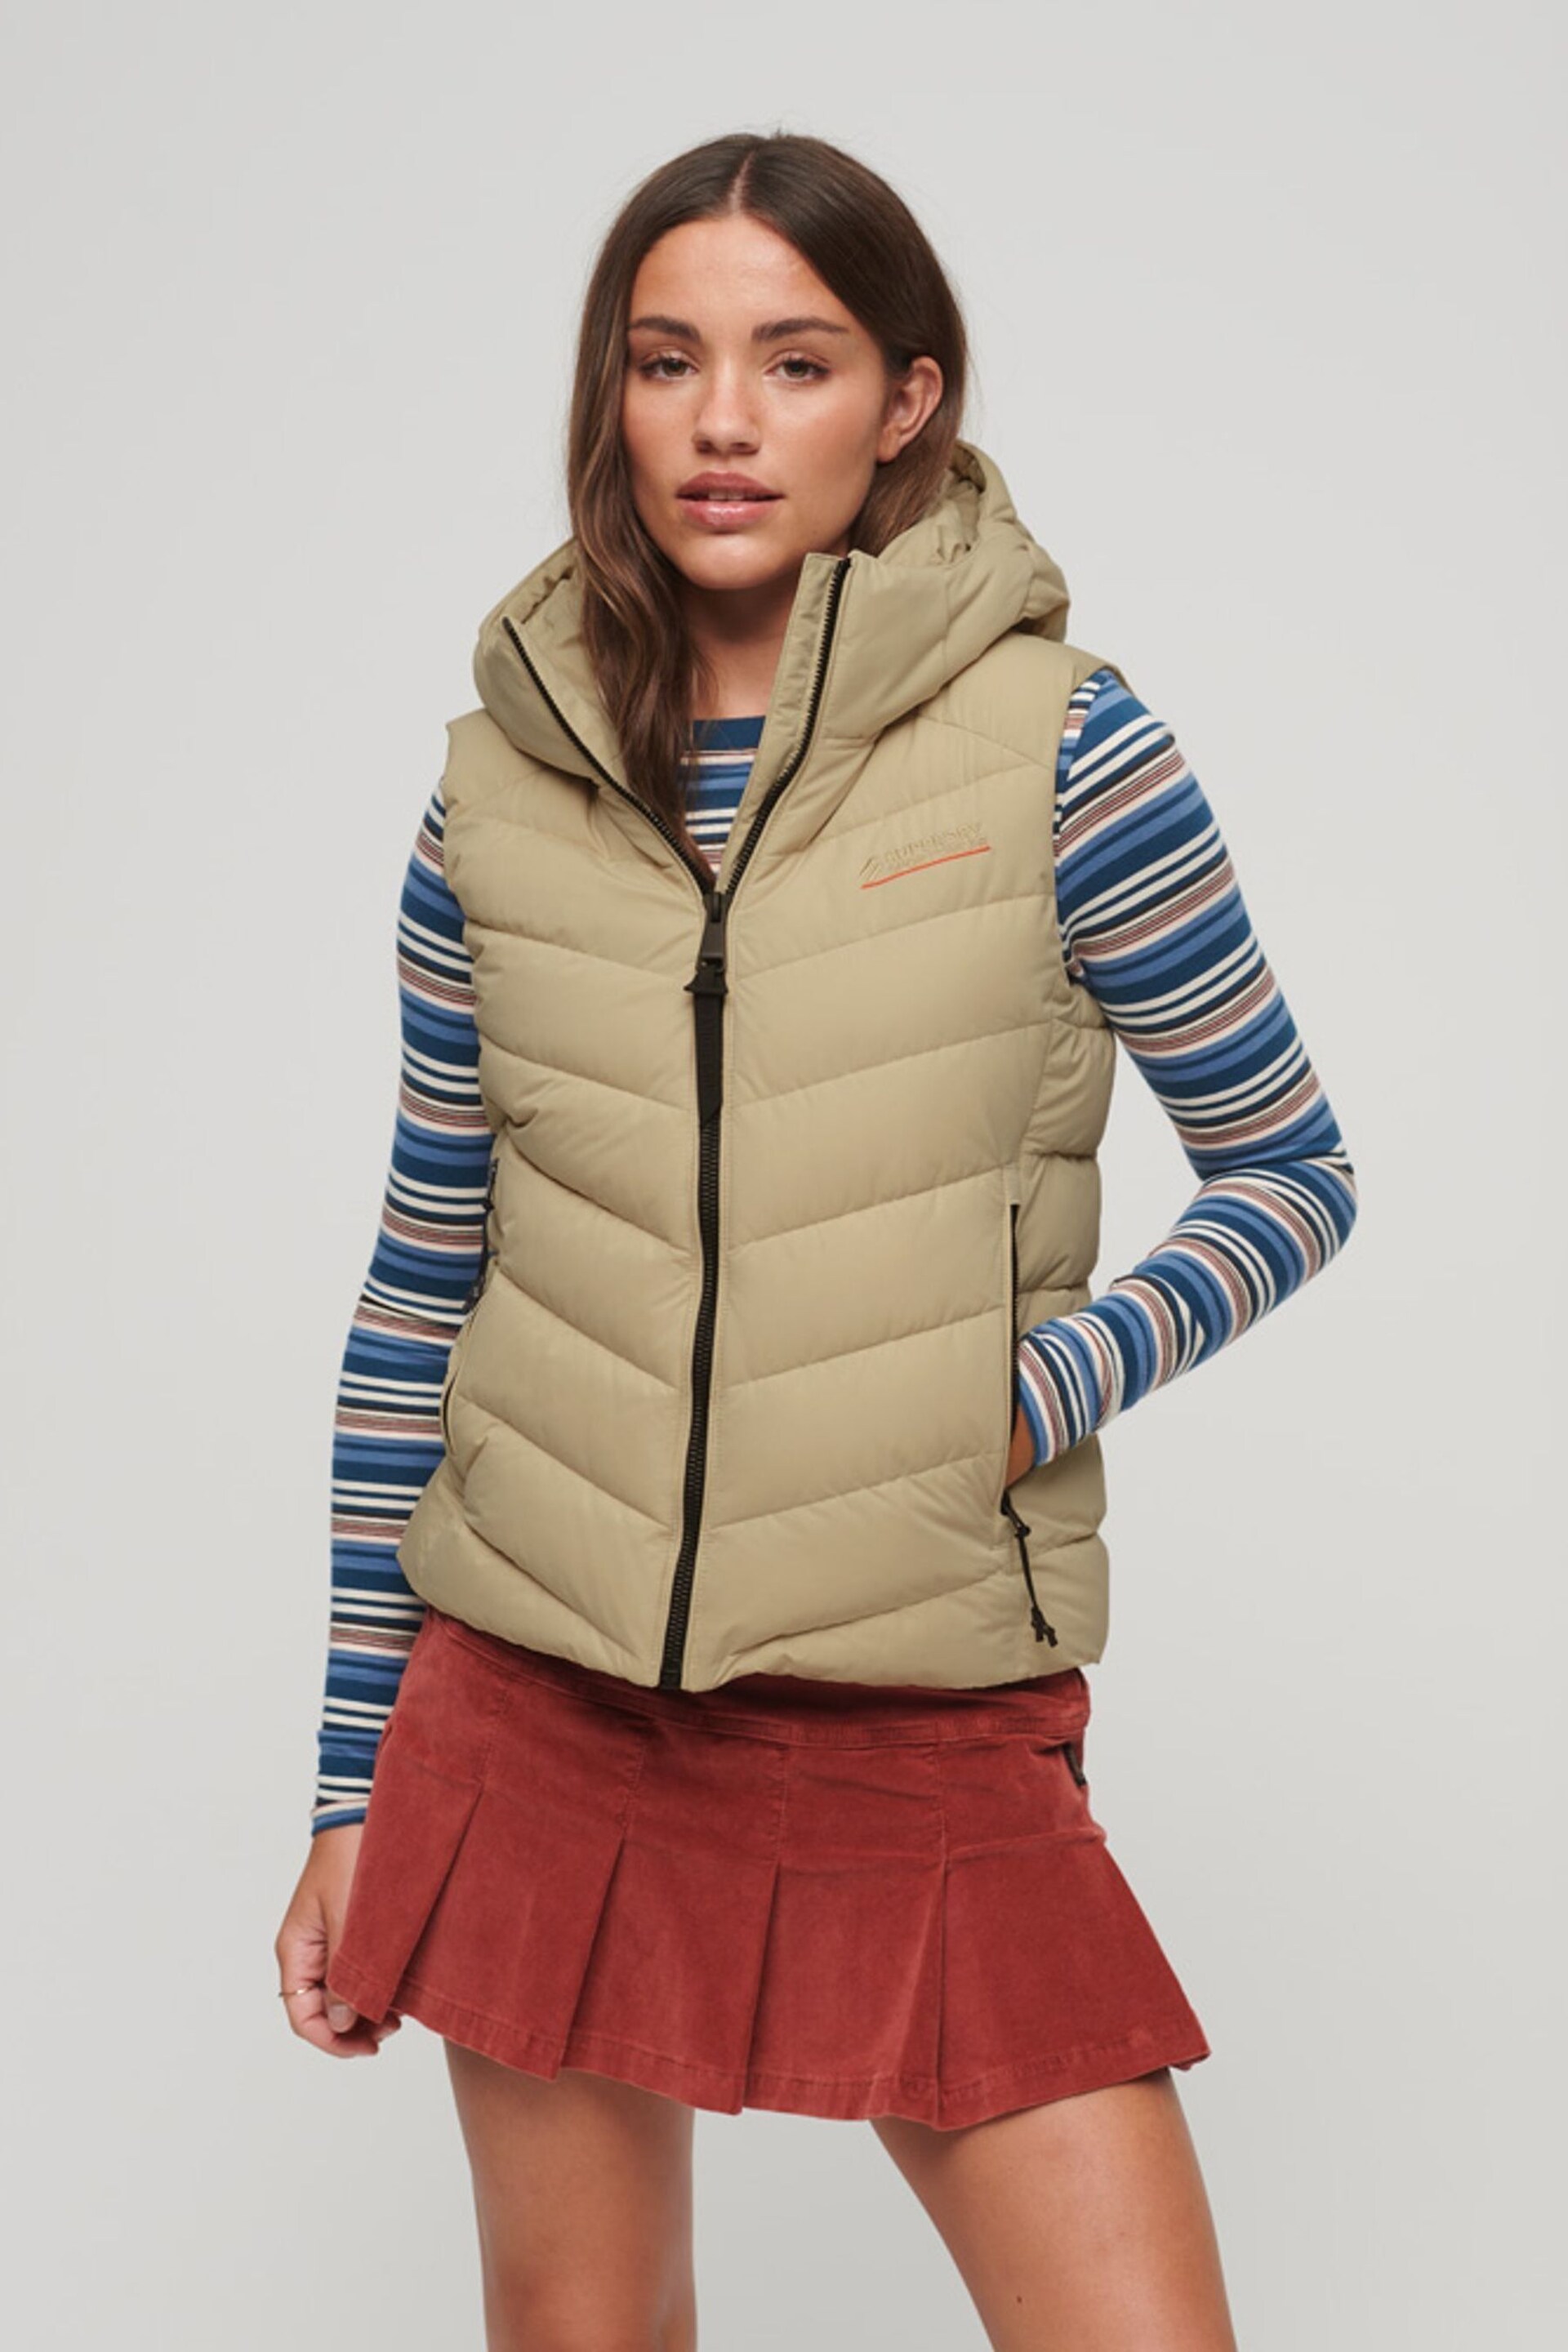 Superdry Nude Hooded Microfibre Padded Jacket - Image 1 of 6